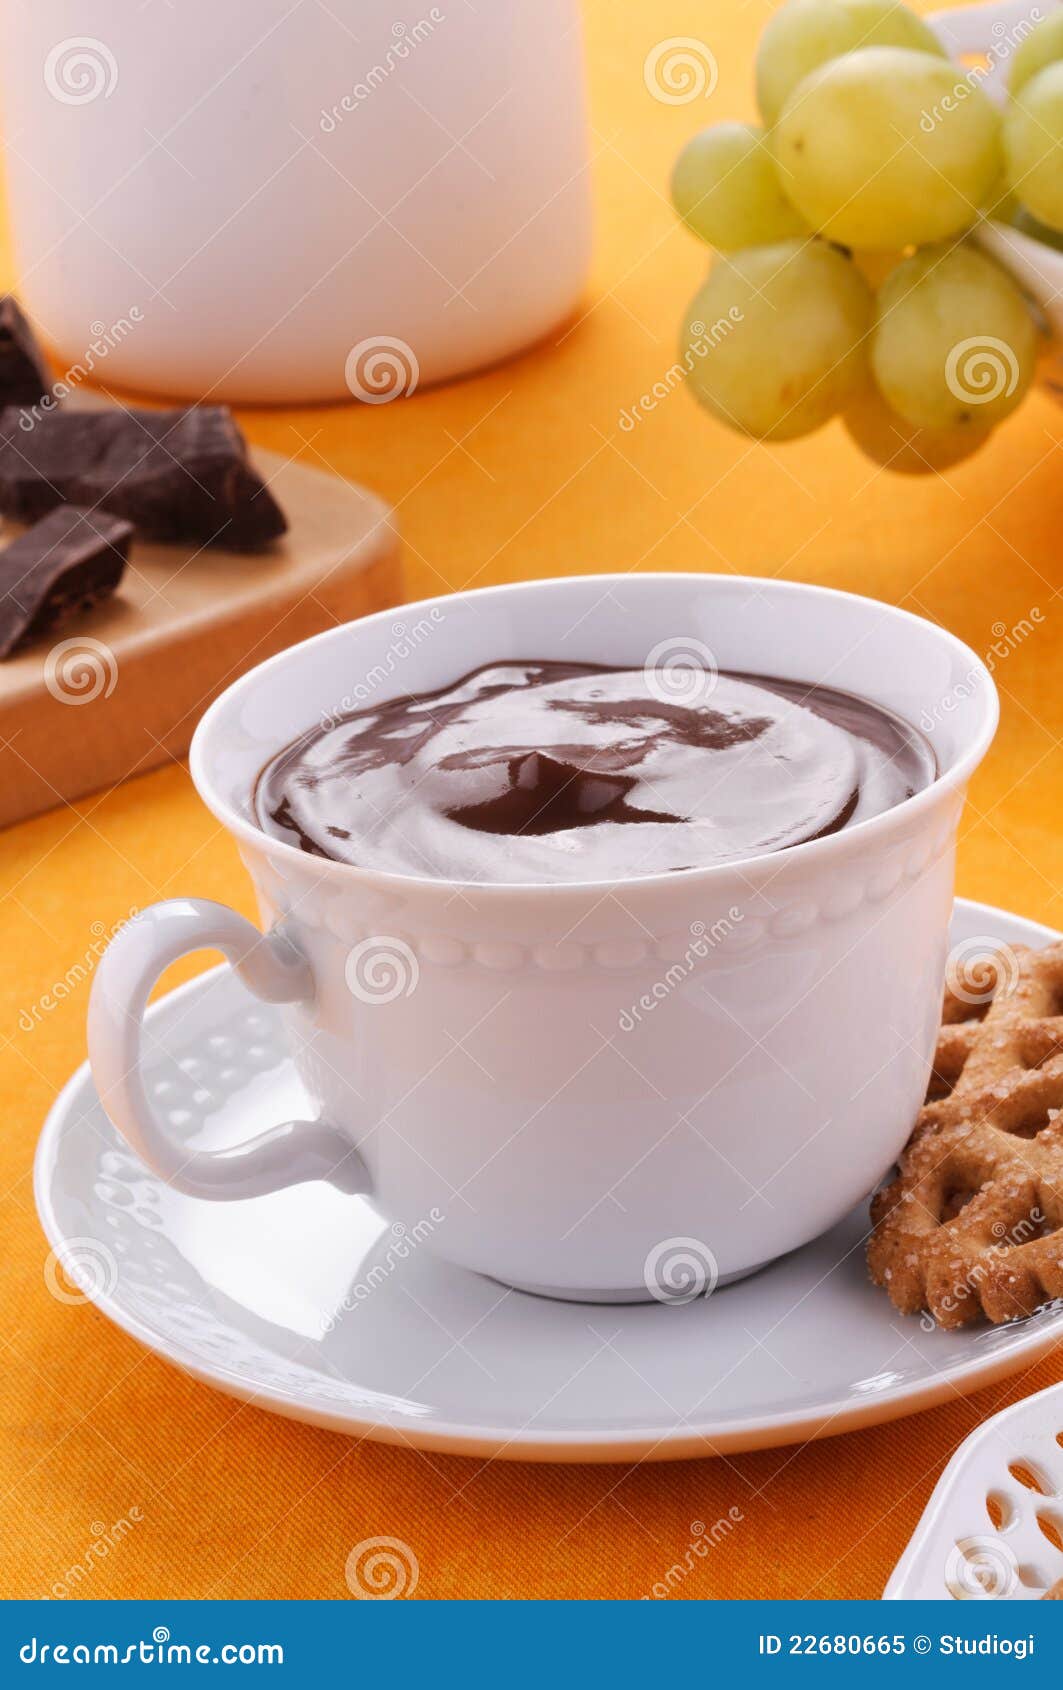 Hot Chocolate with Biscuits and Fruits Stock Image - Image of rink ...